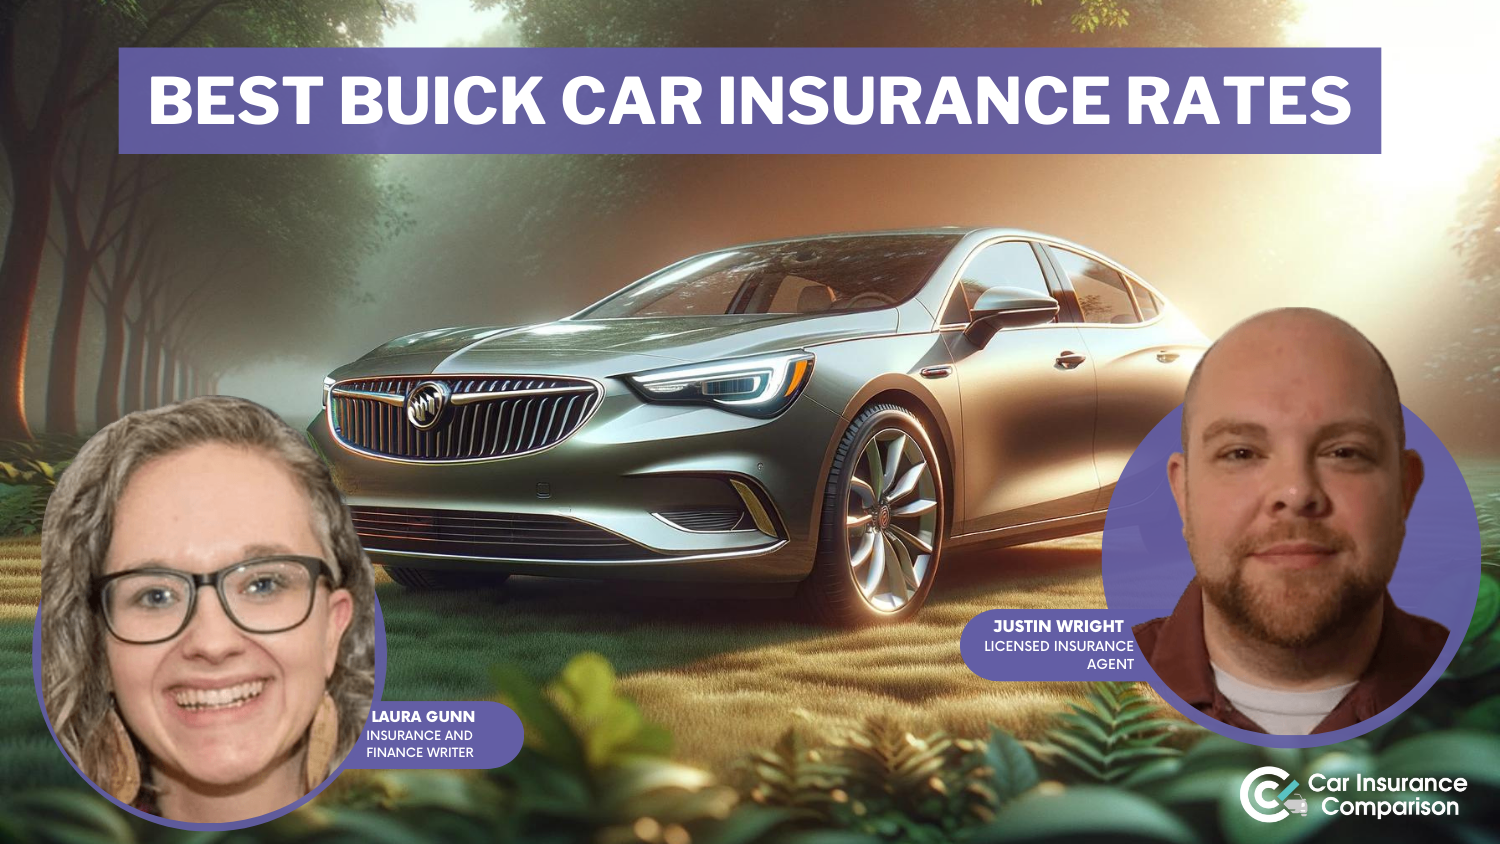 Best Buick Car Insurance Rates: State Farm, USAA, and Progressive